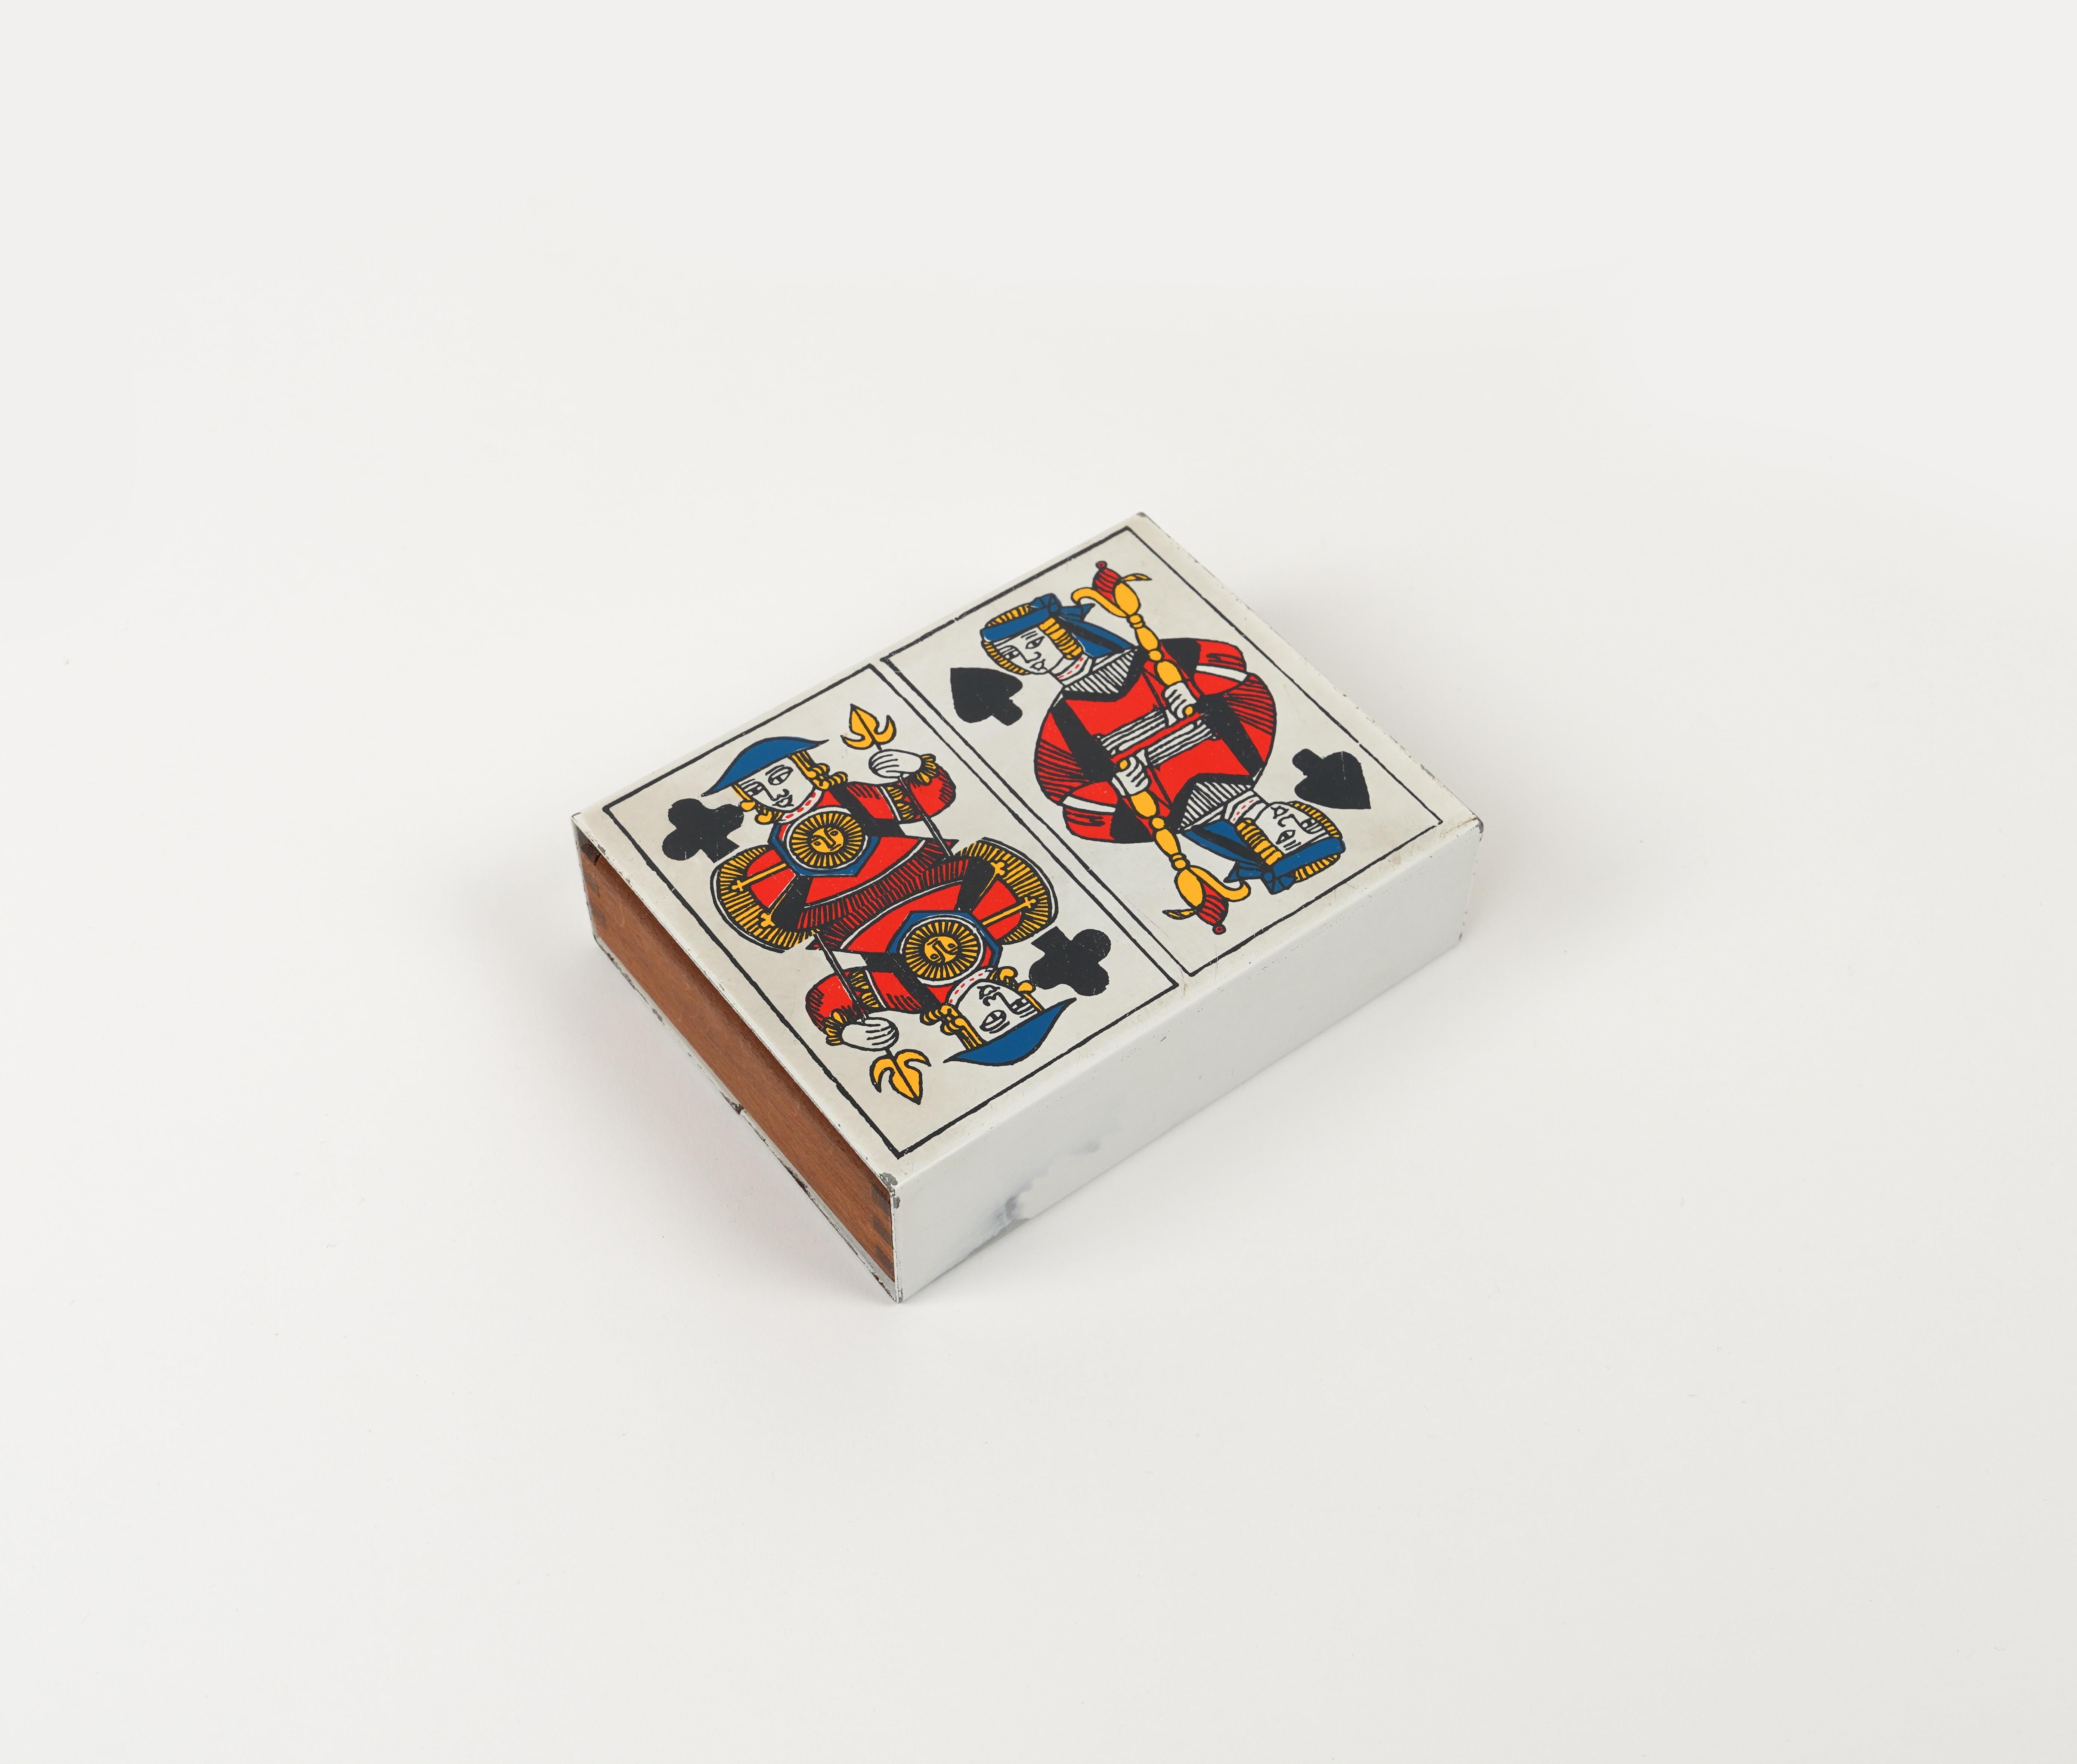 Mid-Century Modern Midcentury Box in Enameled Metal and Wood by Piero Fornasetti, Italy 1960s